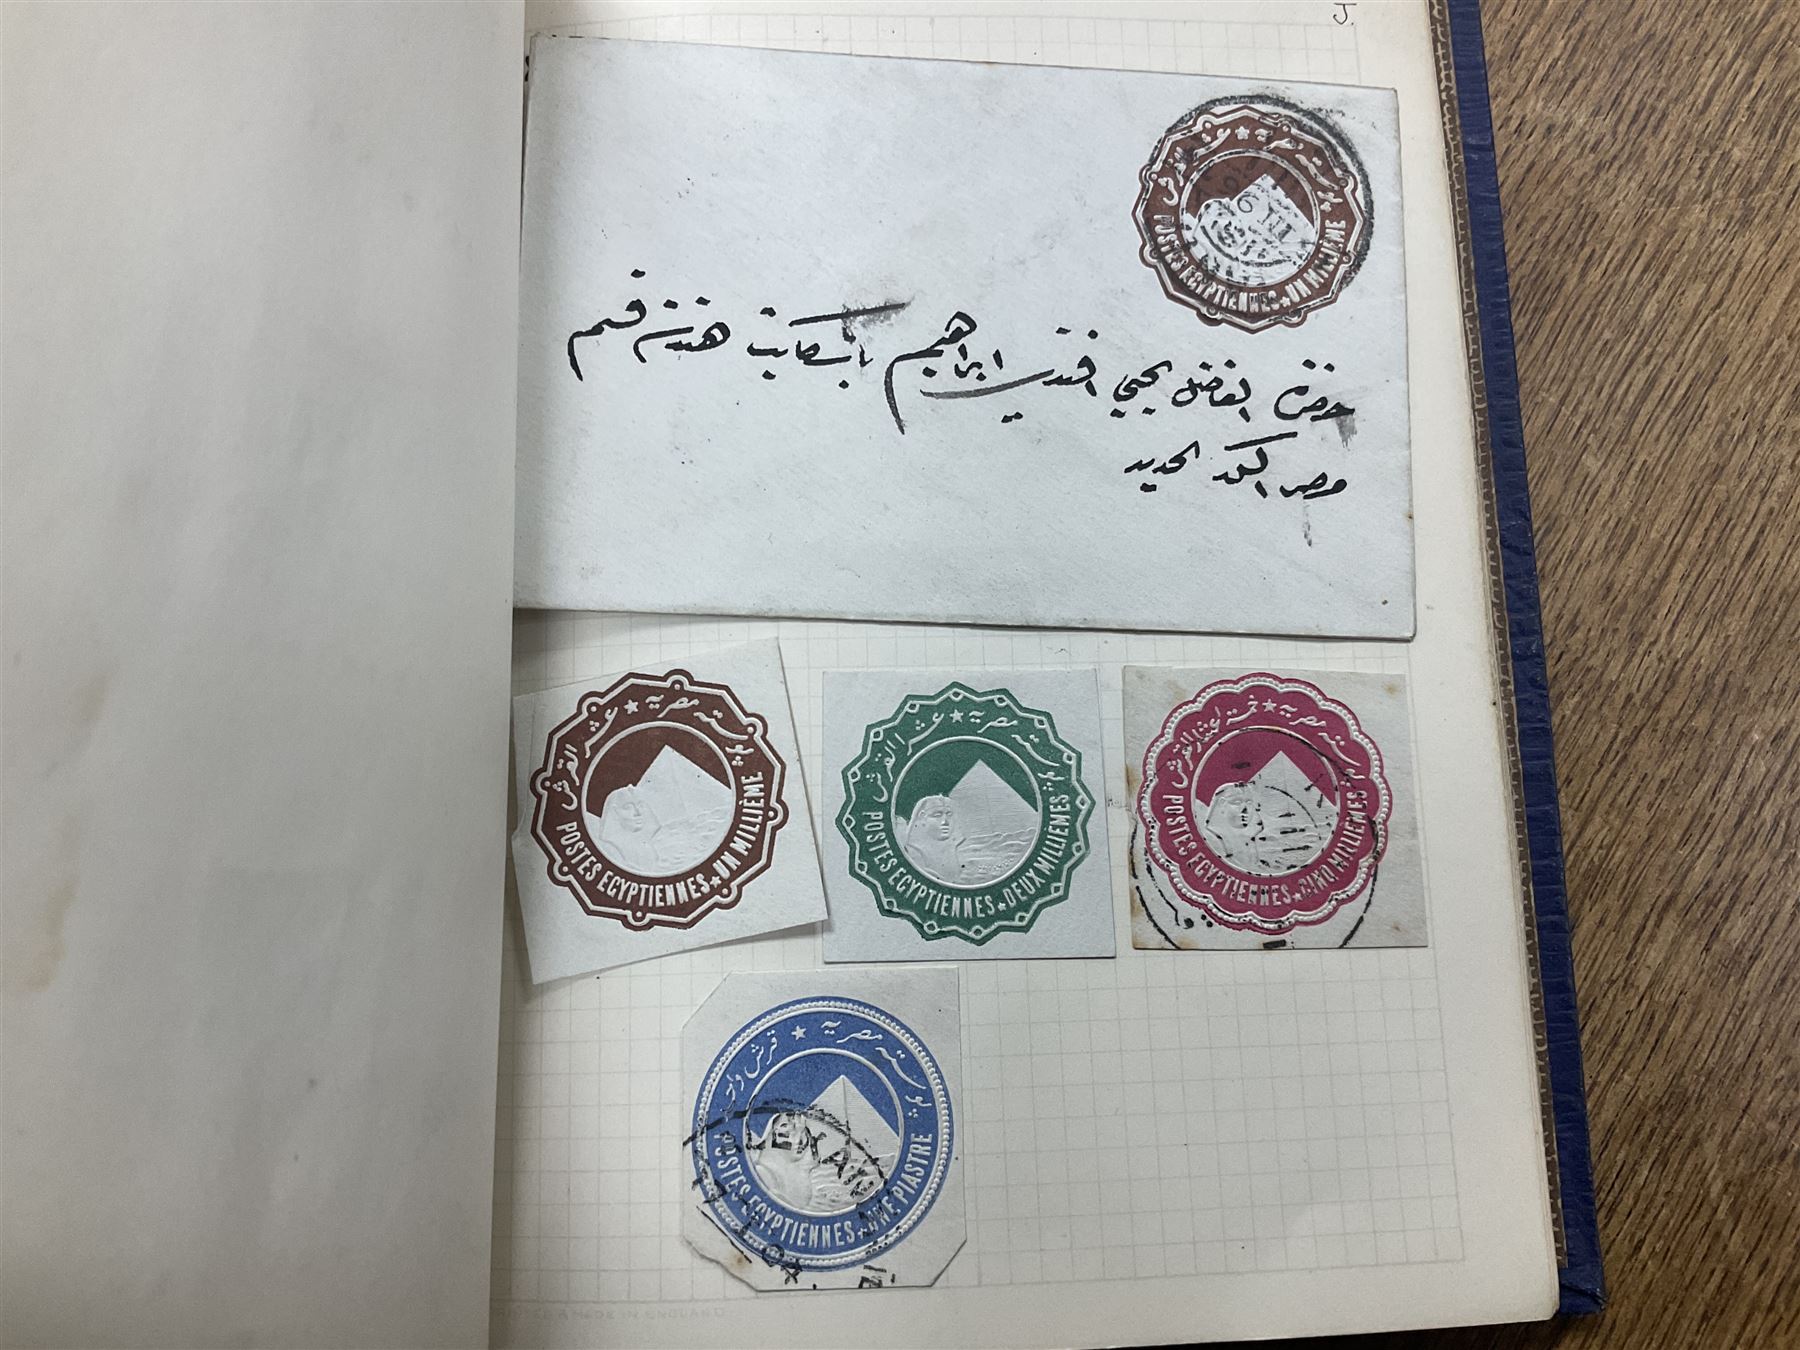 Egypt 1866 and later stamps - Image 609 of 761